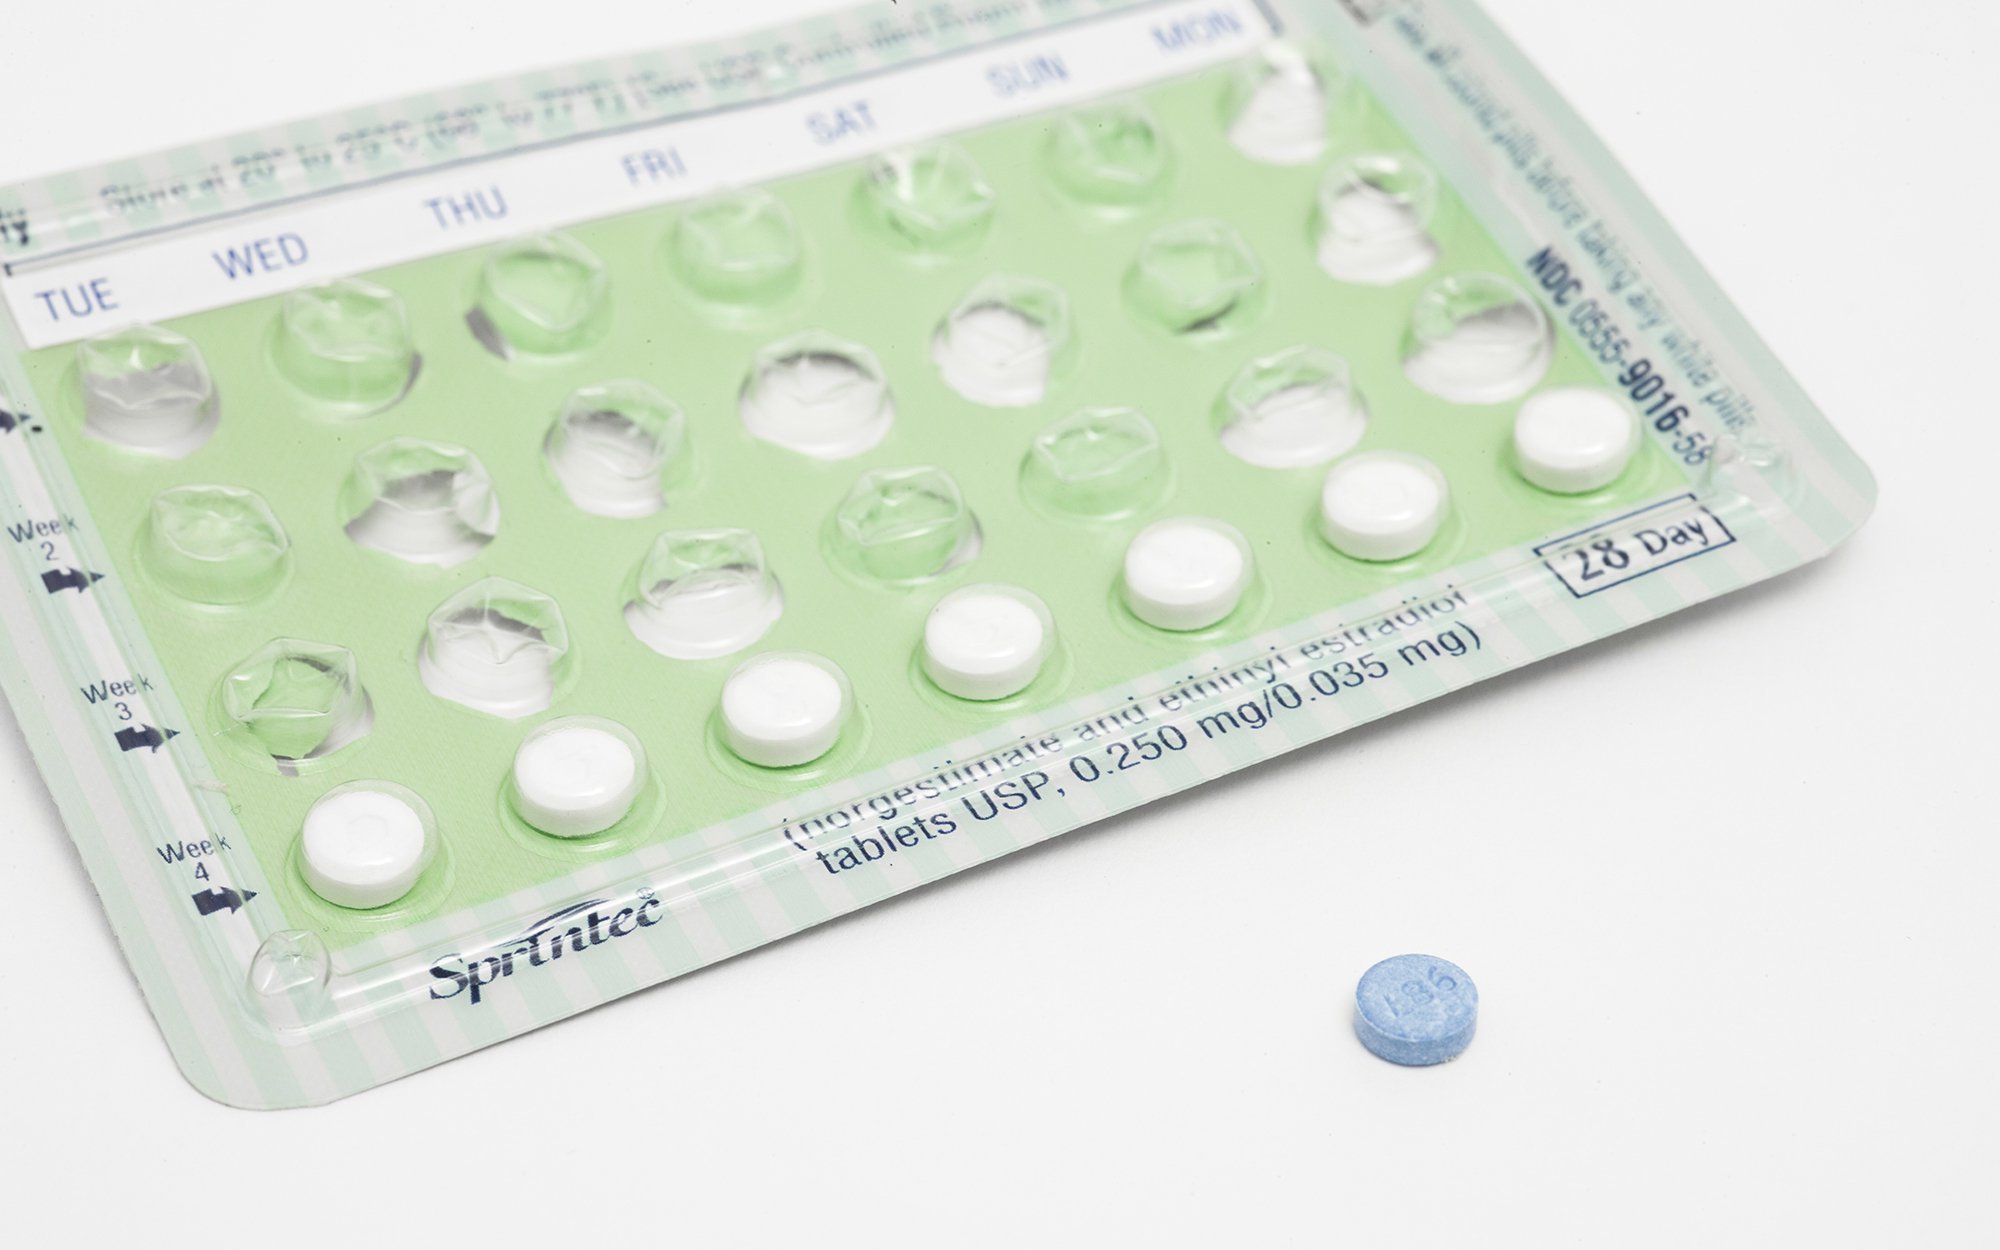 are birth control pills just take as needed